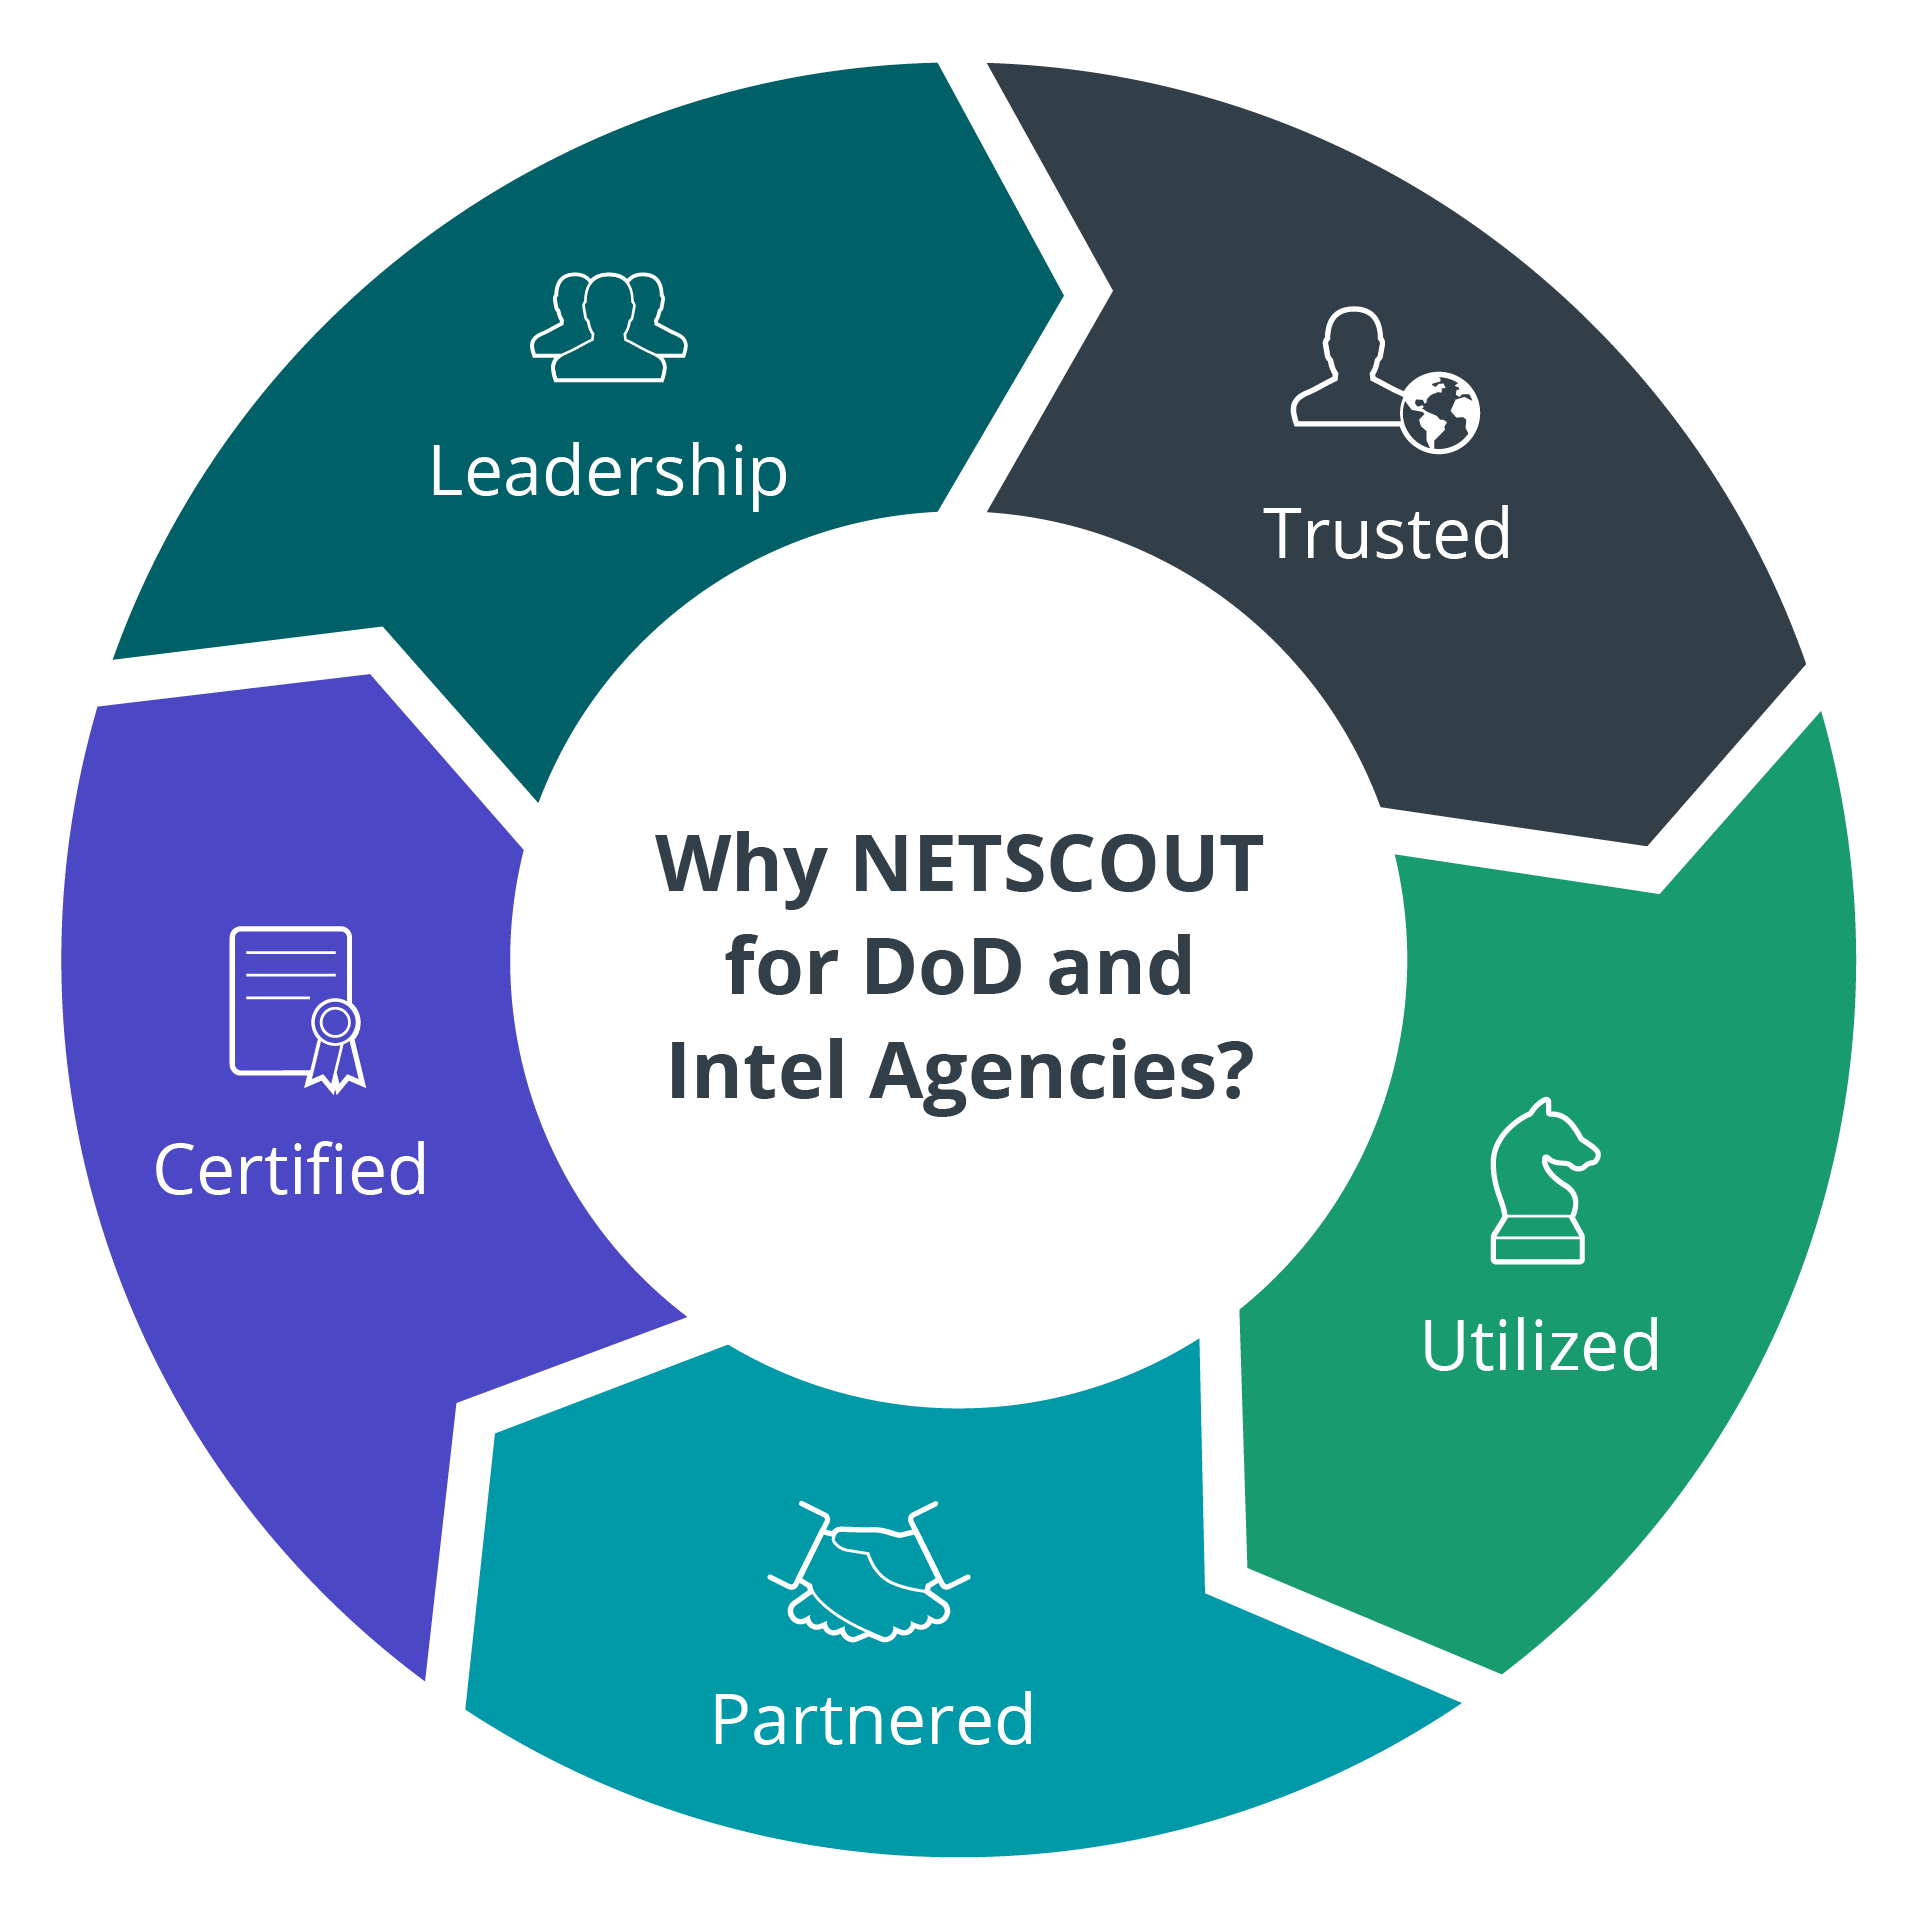 NETSCOUT for DoD & Intel Agencies